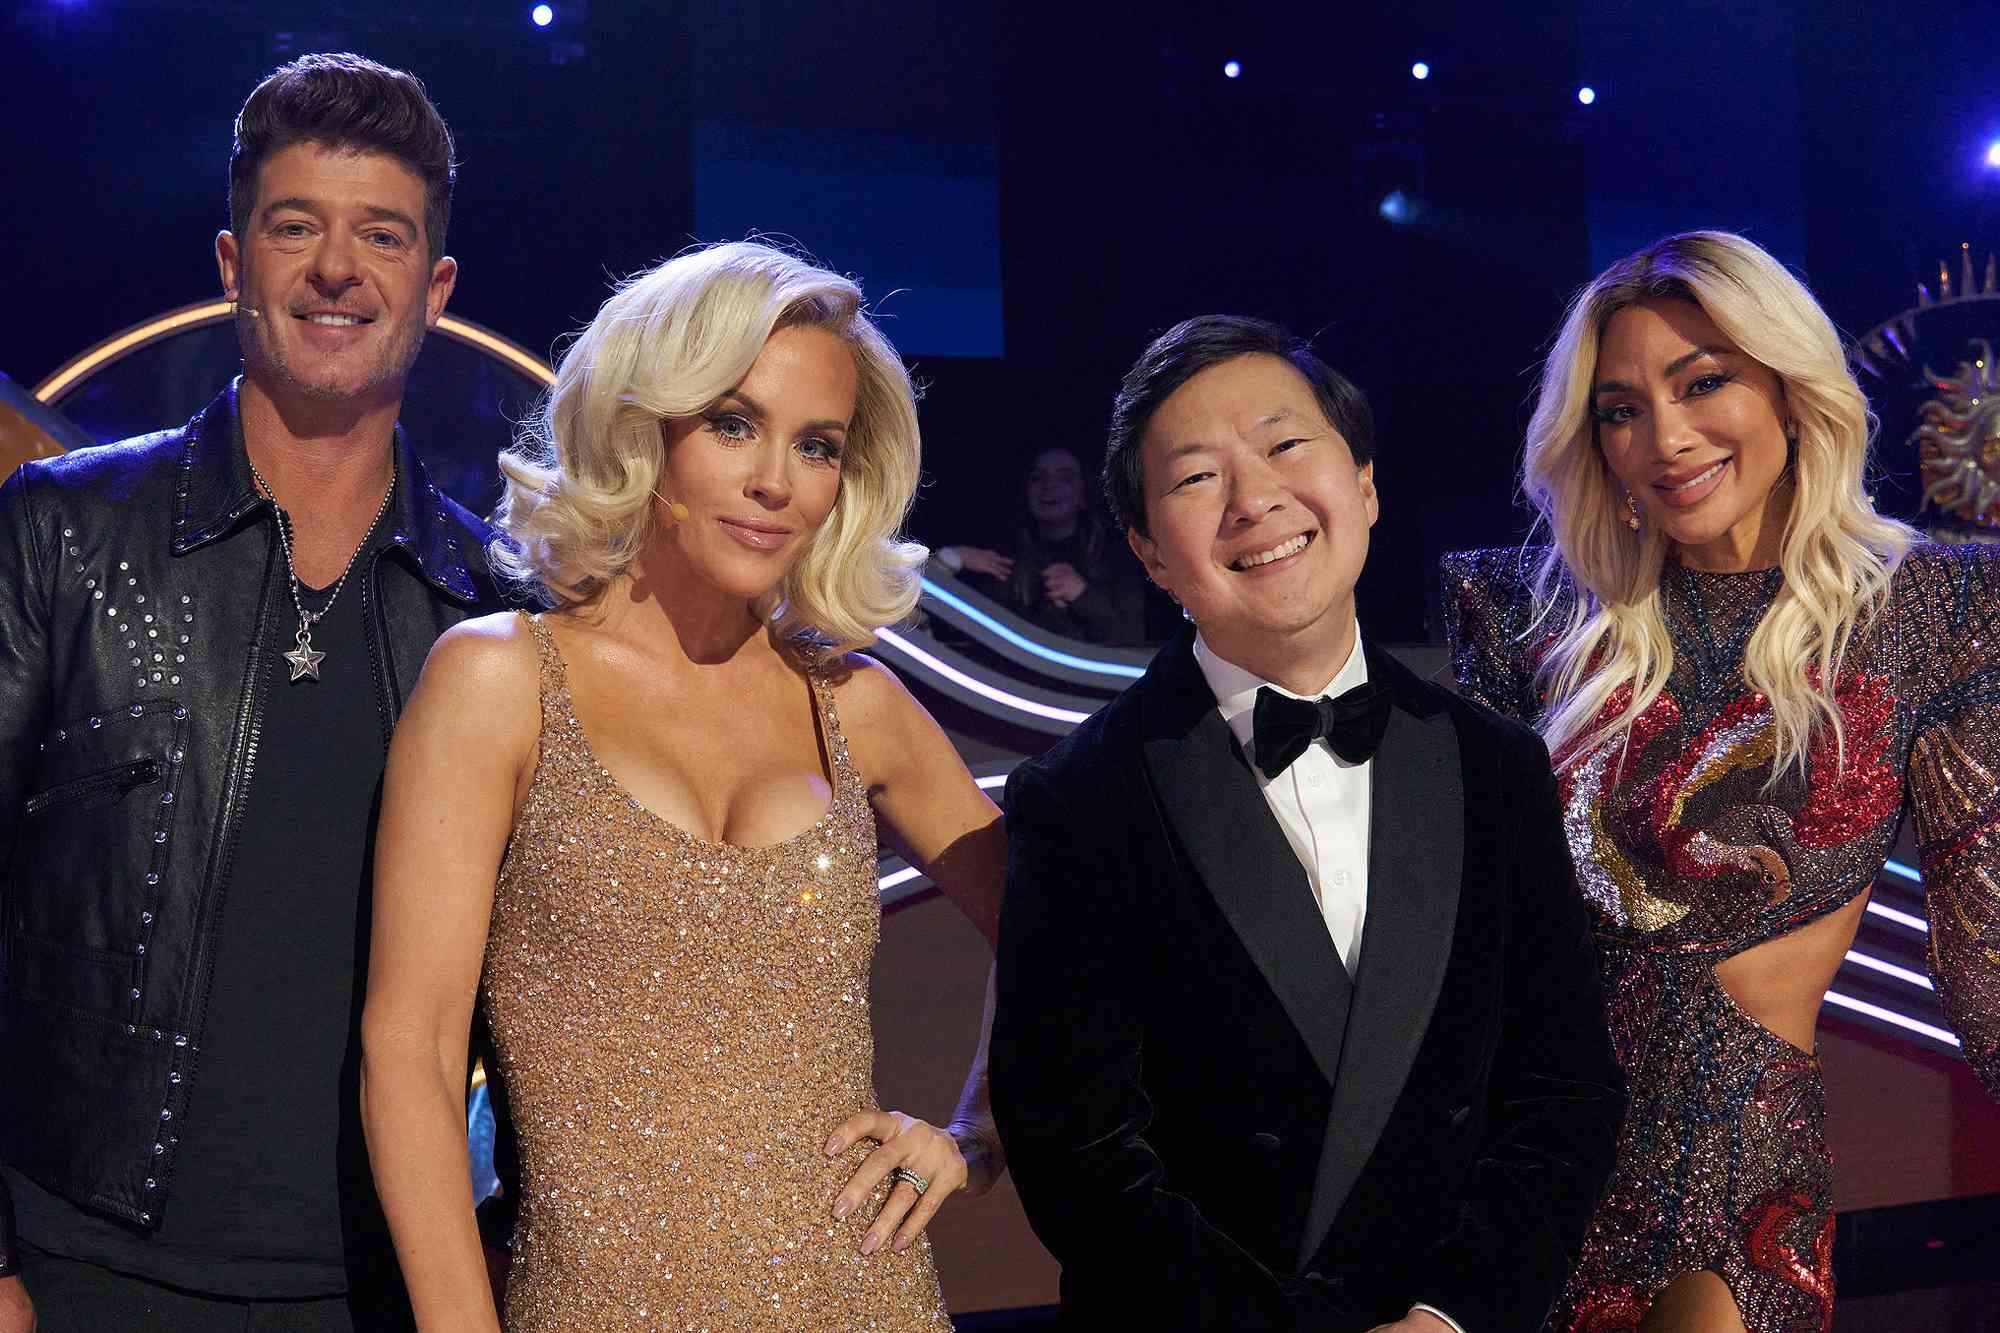 THE MASKED SINGER. L-R: Robin Thicke, Jenny McCarthy Wahlberg, Ken Jeong and Nicole Scherzinger in the season nine premiere episode of THE MASKED SINGER airing Wednesday, Feb.15